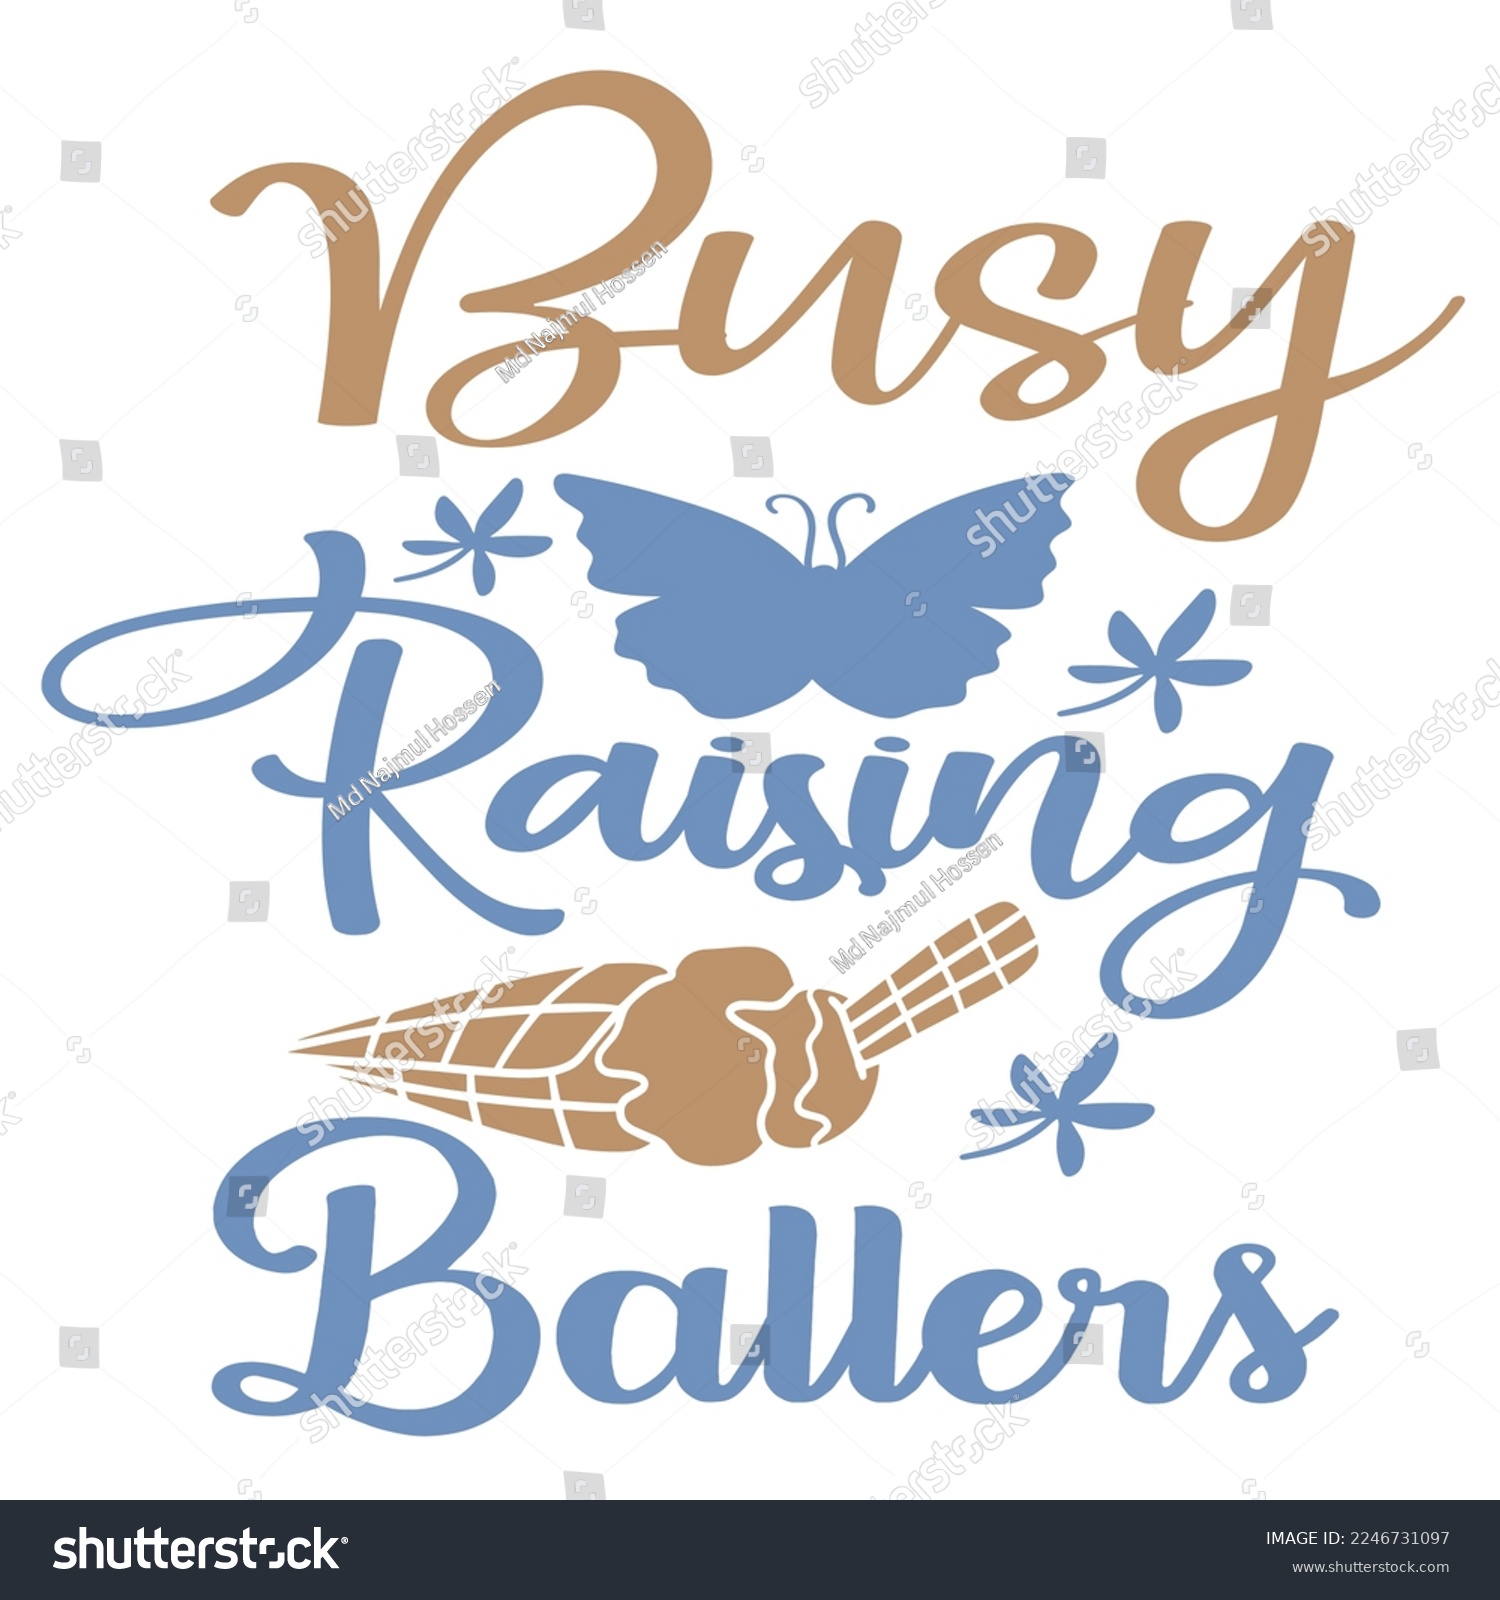 SVG of Busy Raising Ballers, FUNNY CAMPING Mountain Shirt Print Template Simple HIKING TEE typography design svg